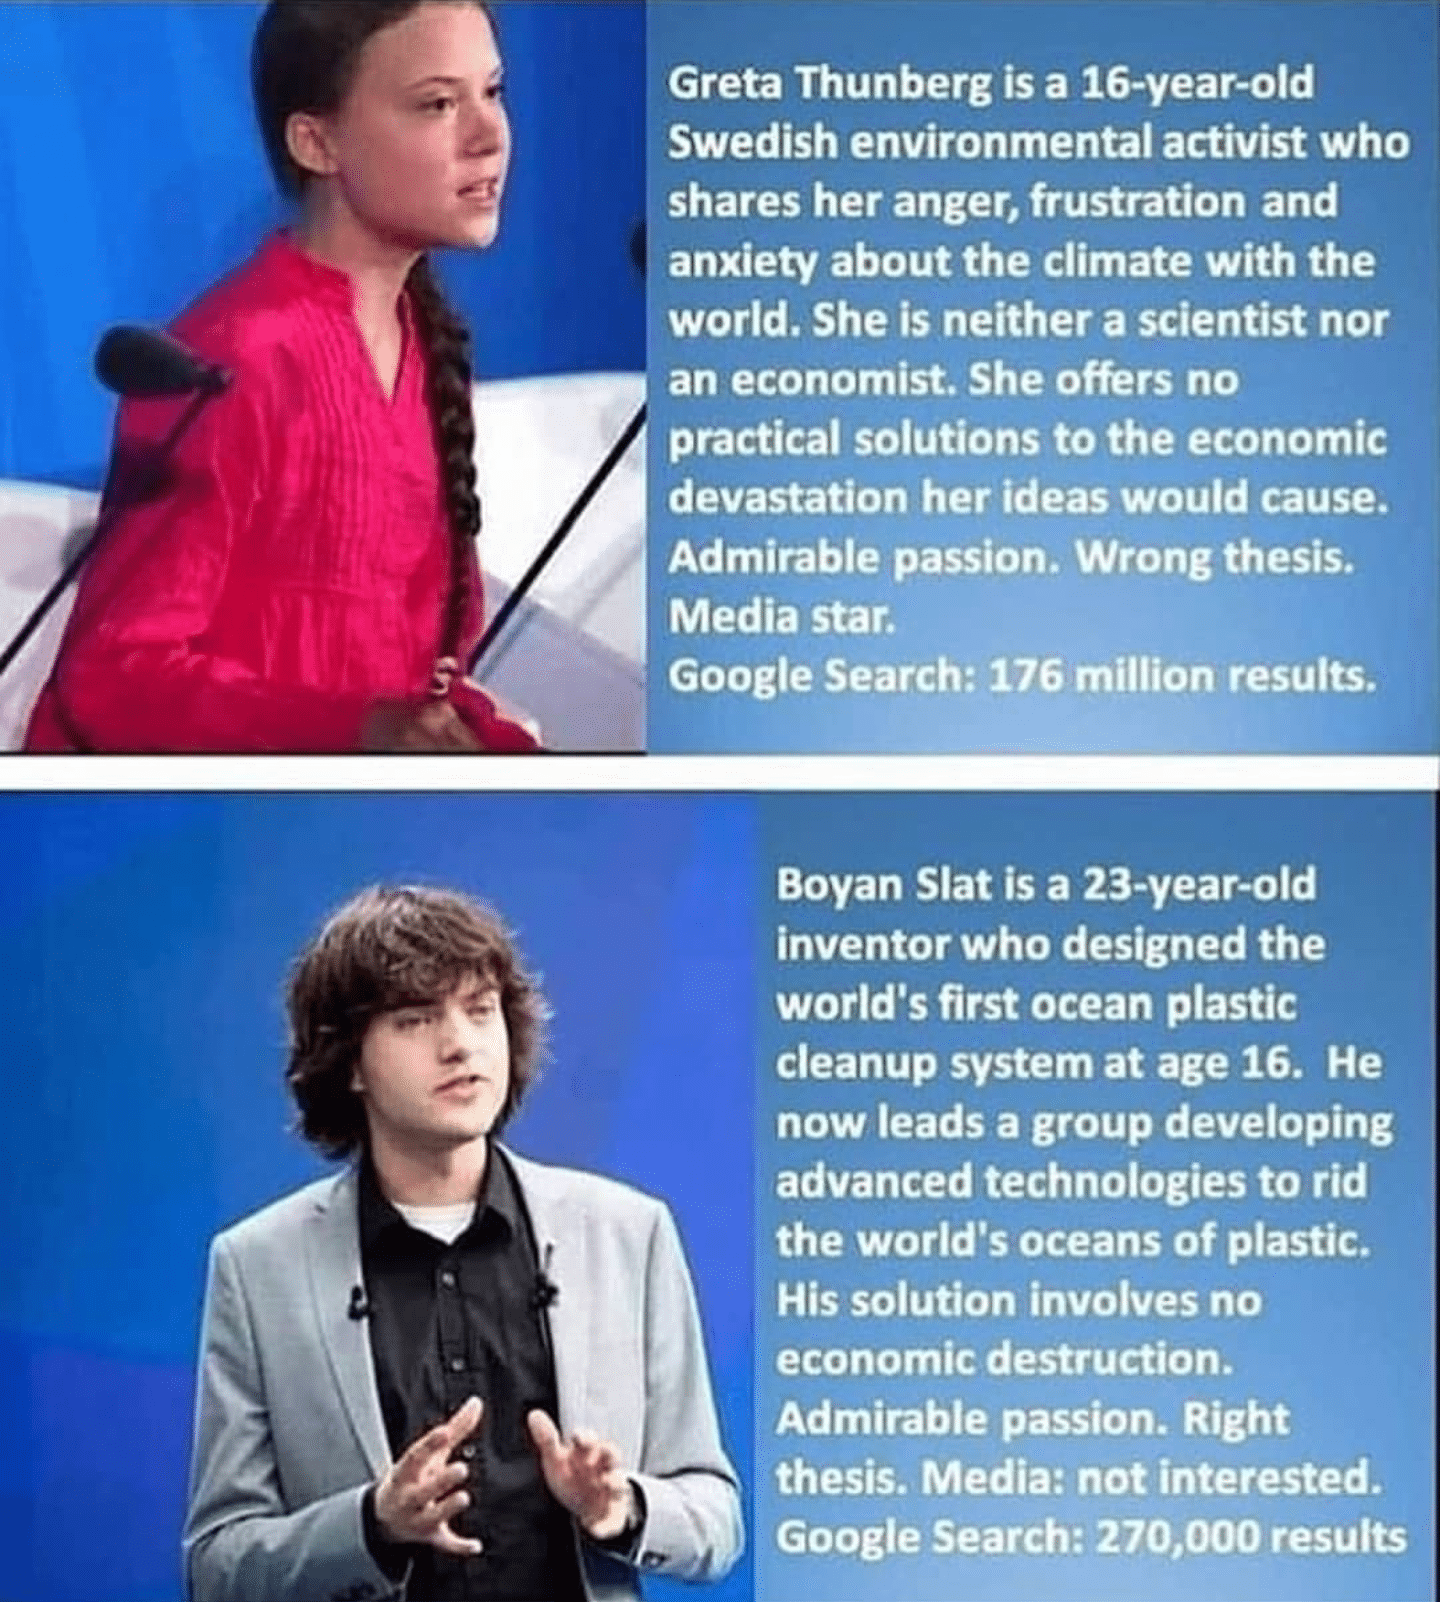 Dank Meme dank-memes cute text: Greta Thunberg is a 16-year-old Swedish environmental activist who shares her anger, frustration and anxiety about the climate with the world. She is neither a scientist nor an economist. She offers no practical solutions to the economic devastation her ideas would cause. Admirable passion. Wrong thesis. Media star. Google Search: 176 million results. Boyan Slat is a 23-year-old inventor who designed the world's first ocean plastic cleanup system at age 16. He now leads a group developing advanced technologies to rid the world's oceans of plastic. His solution involves no economic destruction. Admirable passion. Right thesis. Media: not interested. Google Search: 270,000 results 